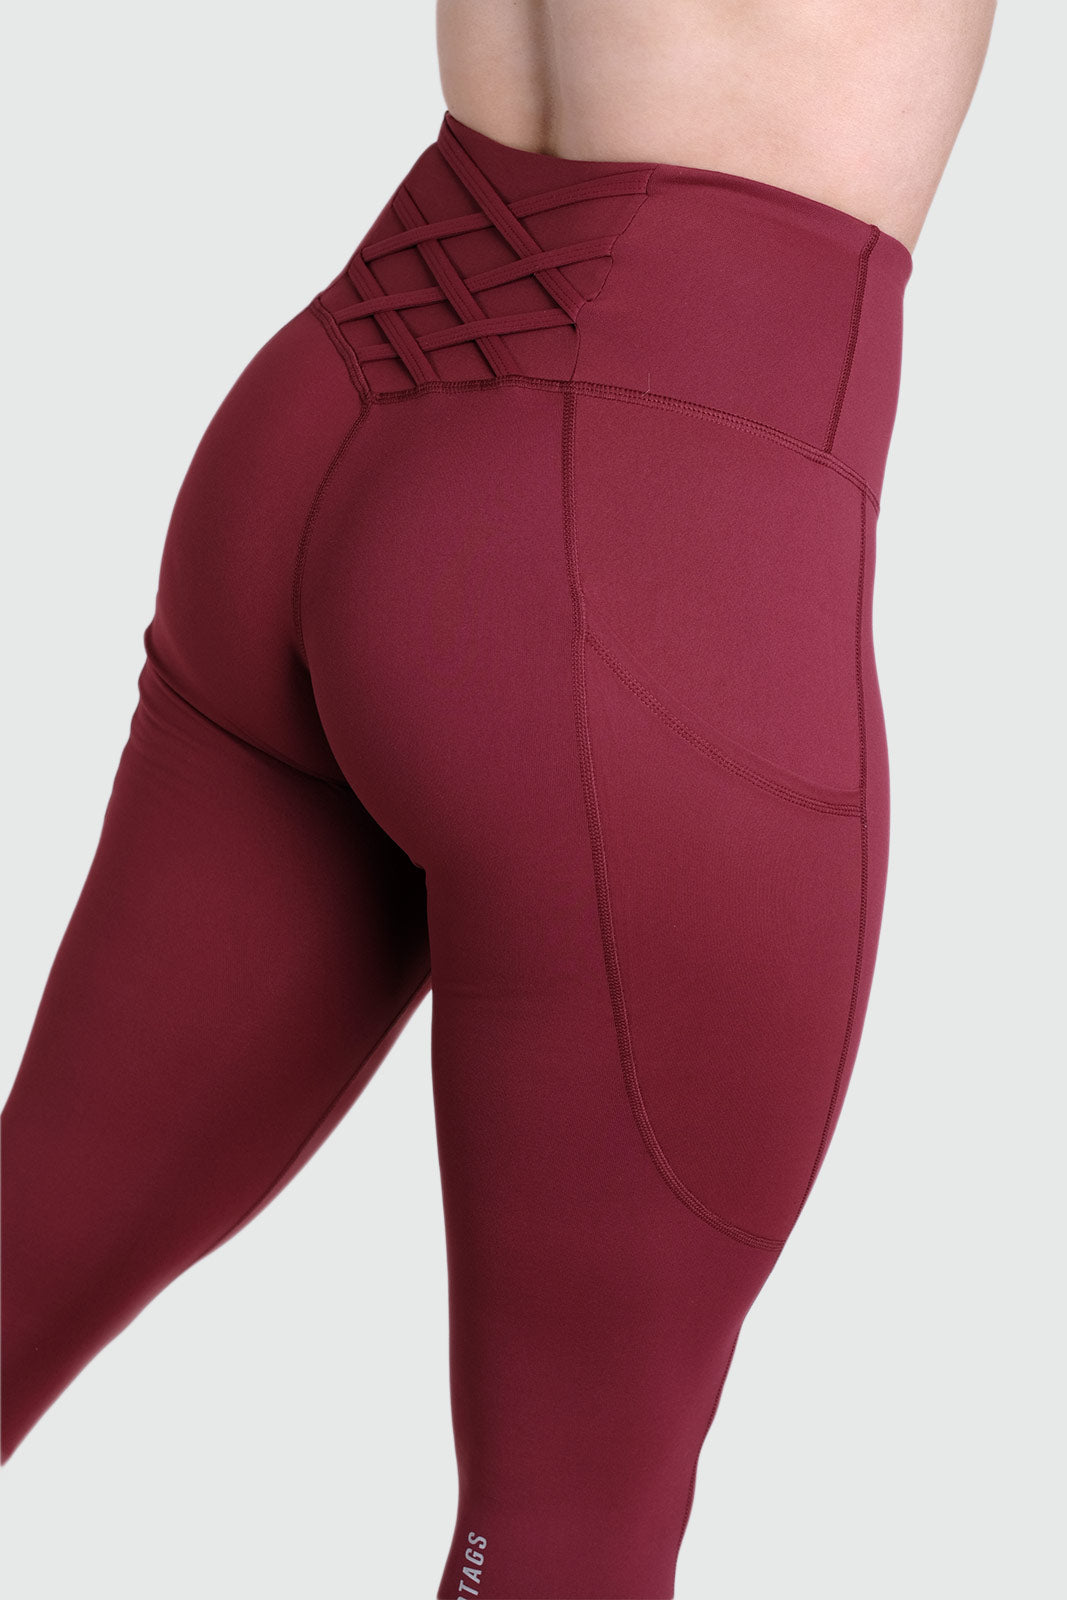 Gymshark 315 Seamless Tights - Cherry Brown/Athletic Maroon | Mens leggings  fashion, Mens workout clothes, Sporty outfits men